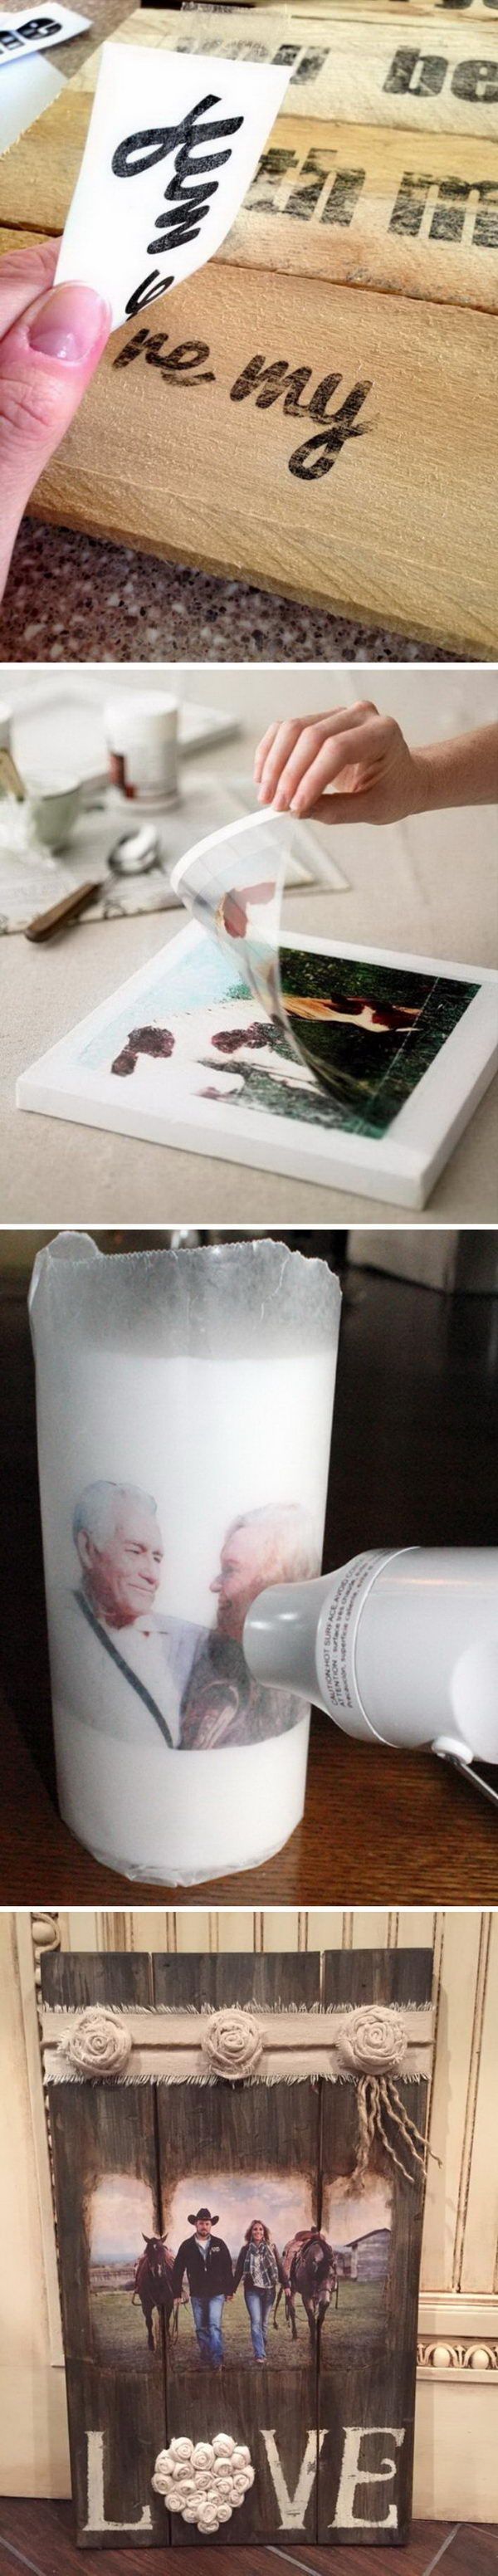 DIY Ideas & Tutorials for Photo Transfer Projects